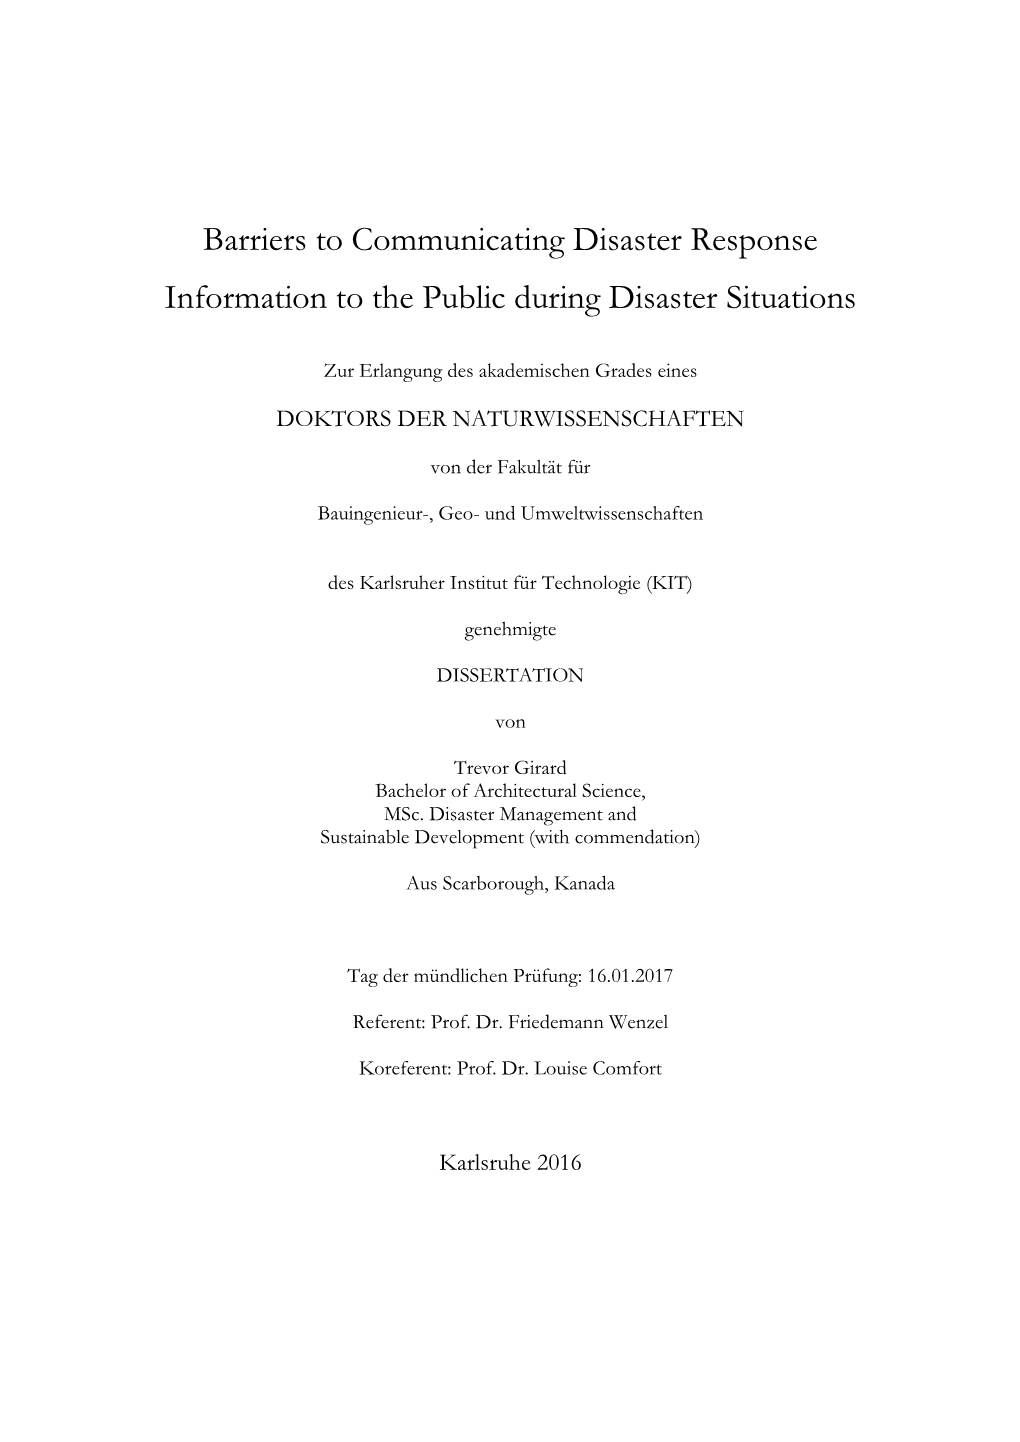 Barriers to Communicating Disaster Response Information to the Public During Disaster Situations